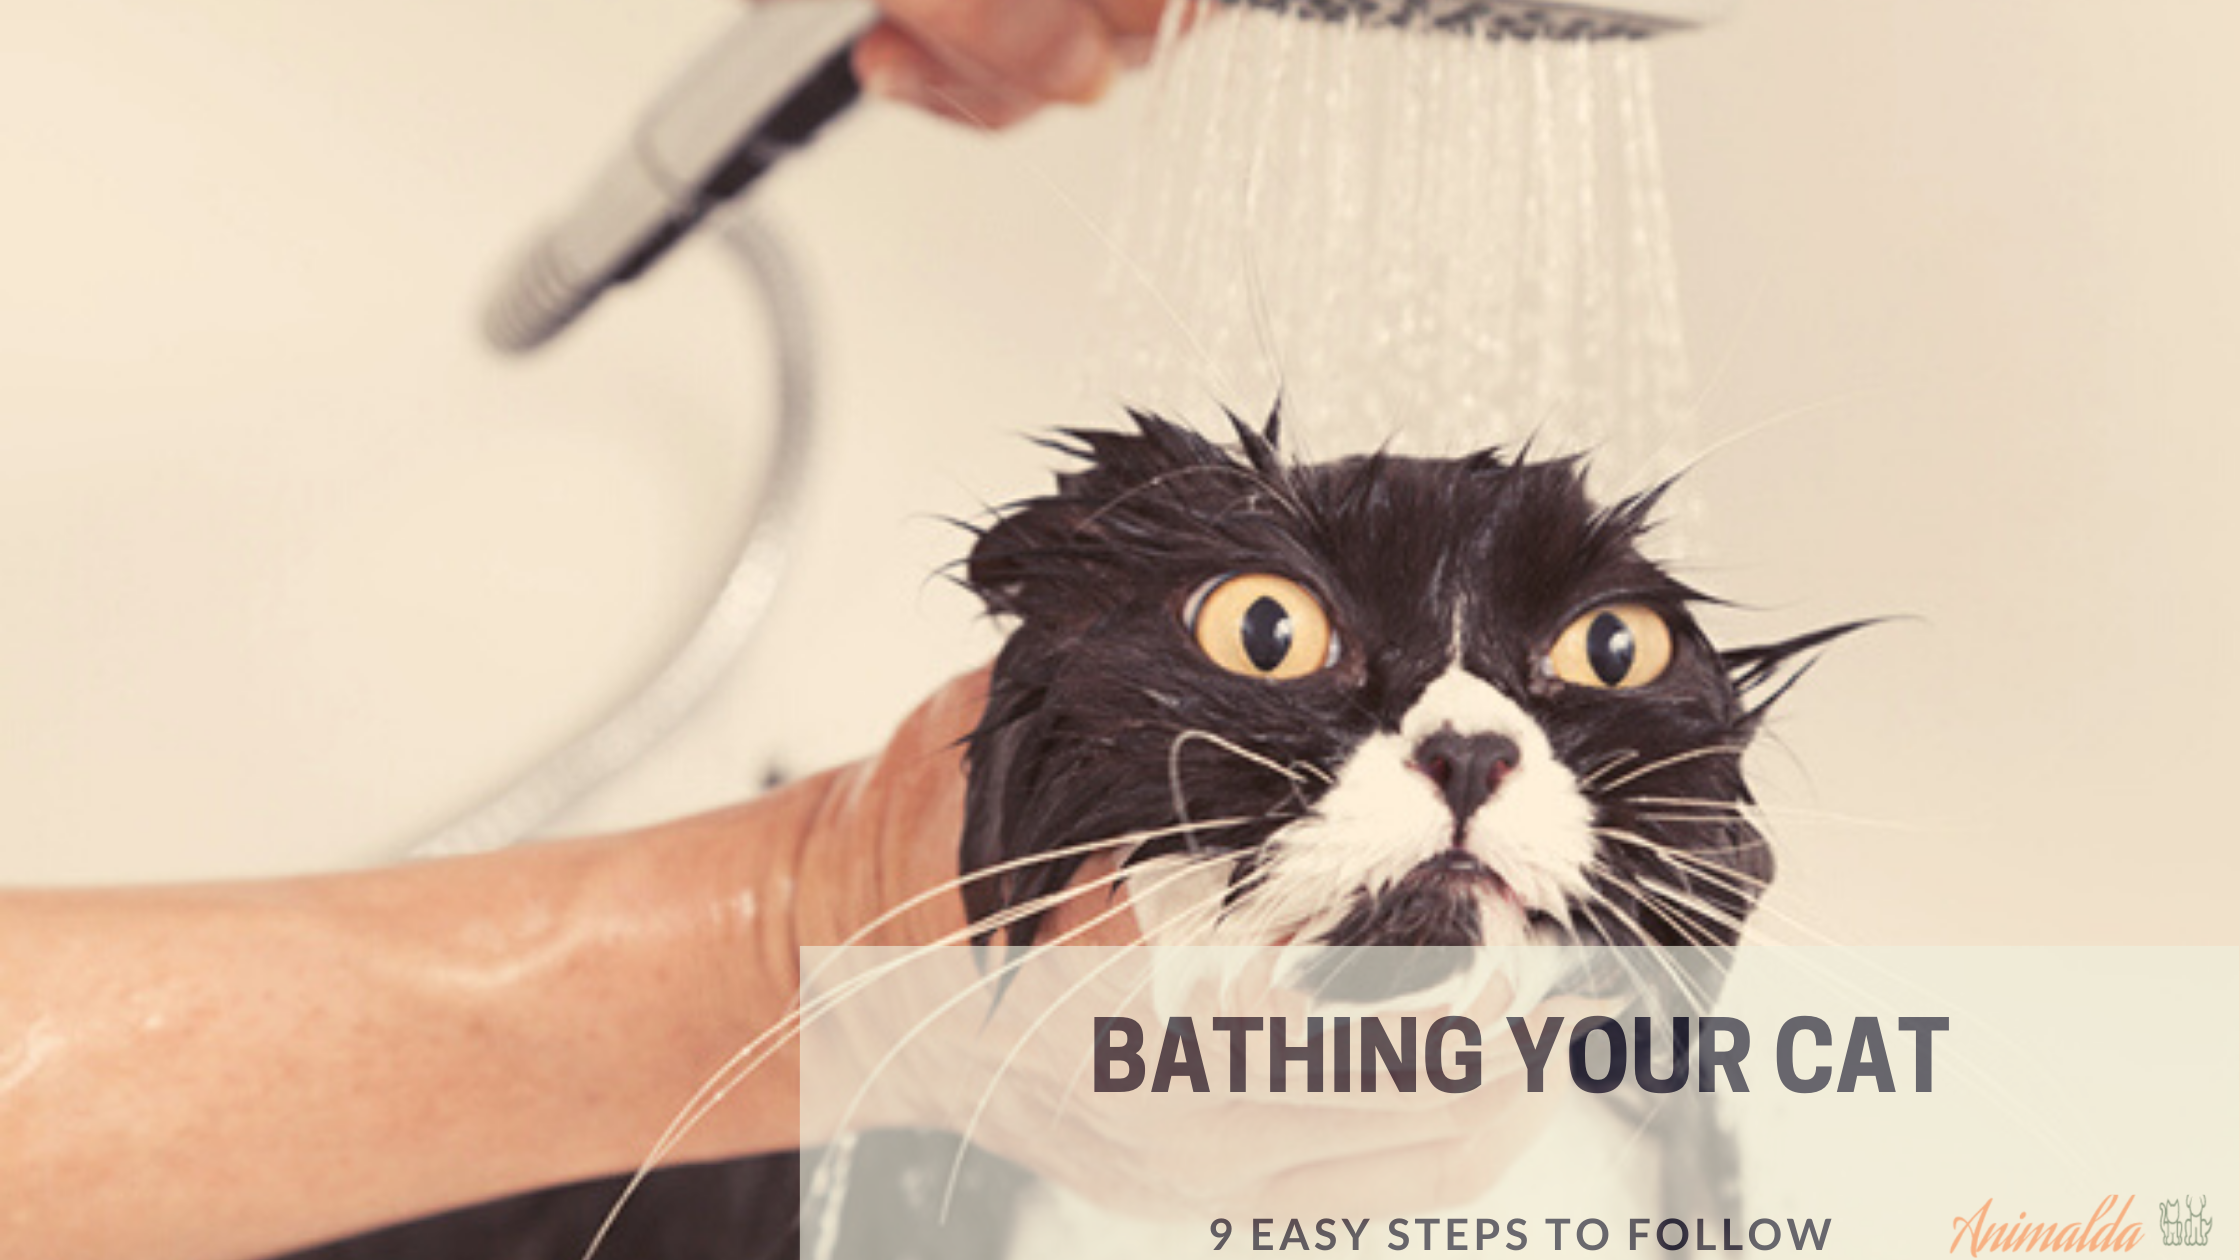 9 easy steps bathing your cat